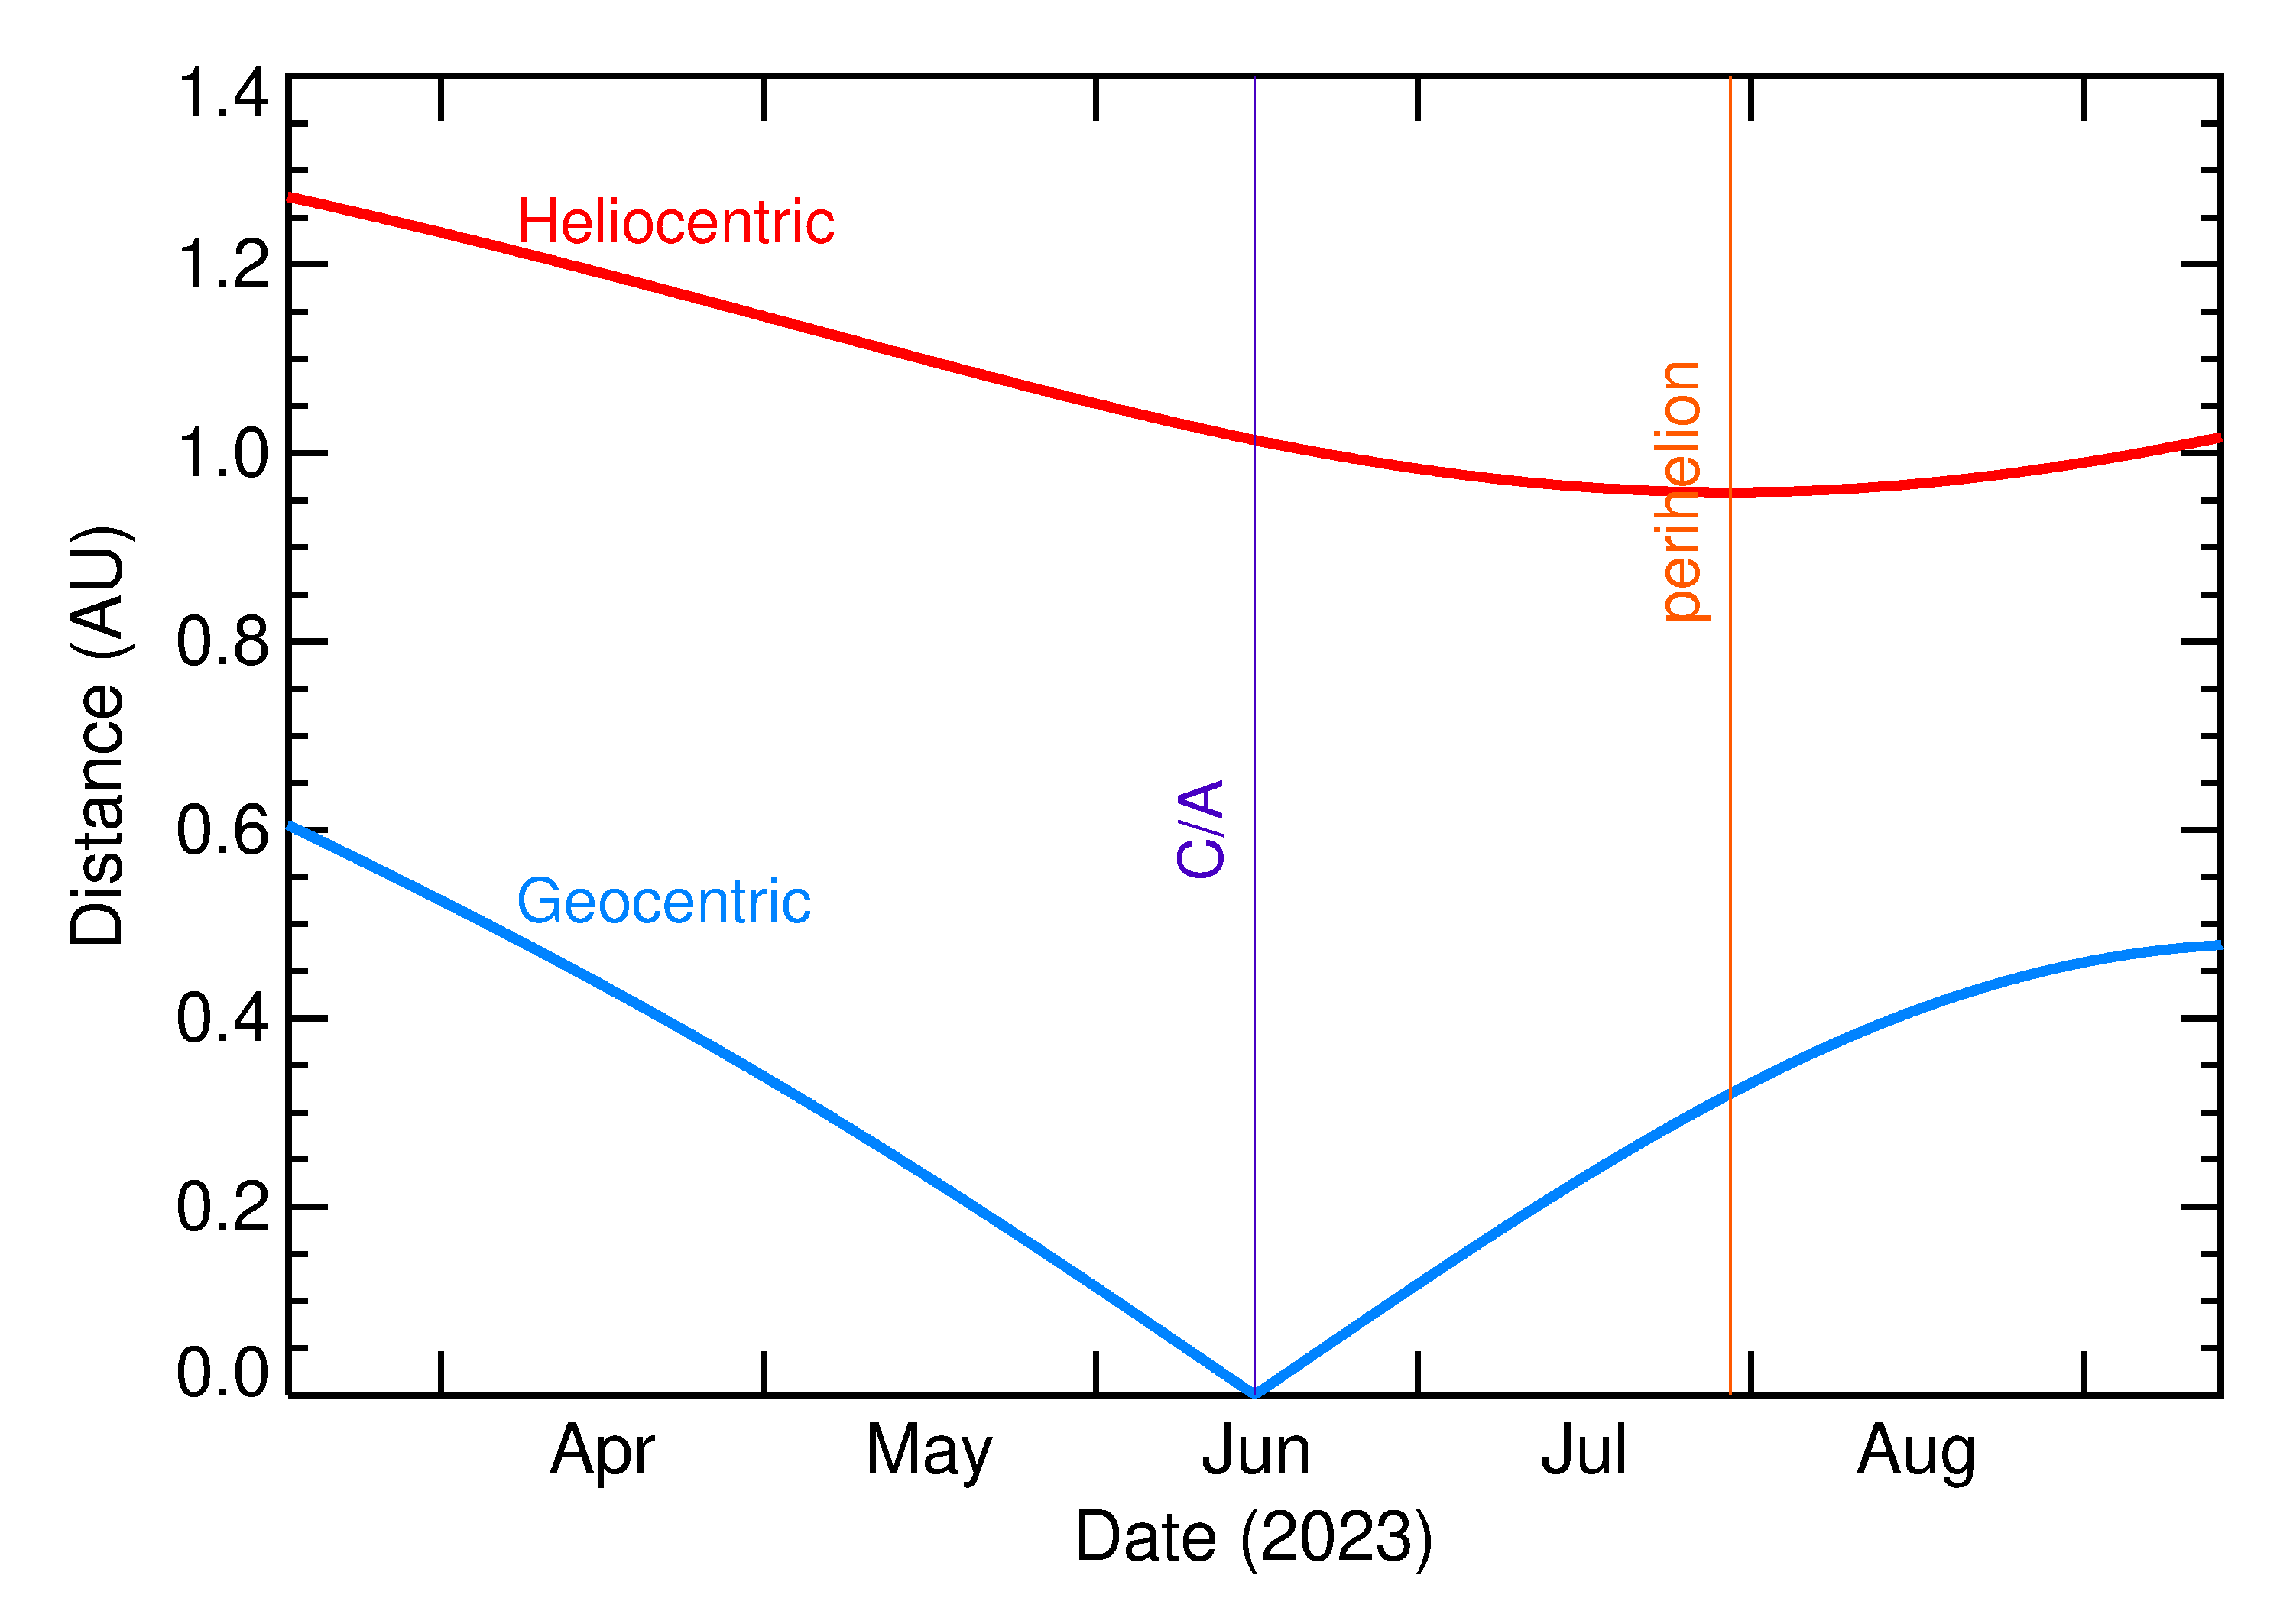 Heliocentric and Geocentric Distances of 2023 LZ in the months around closest approach